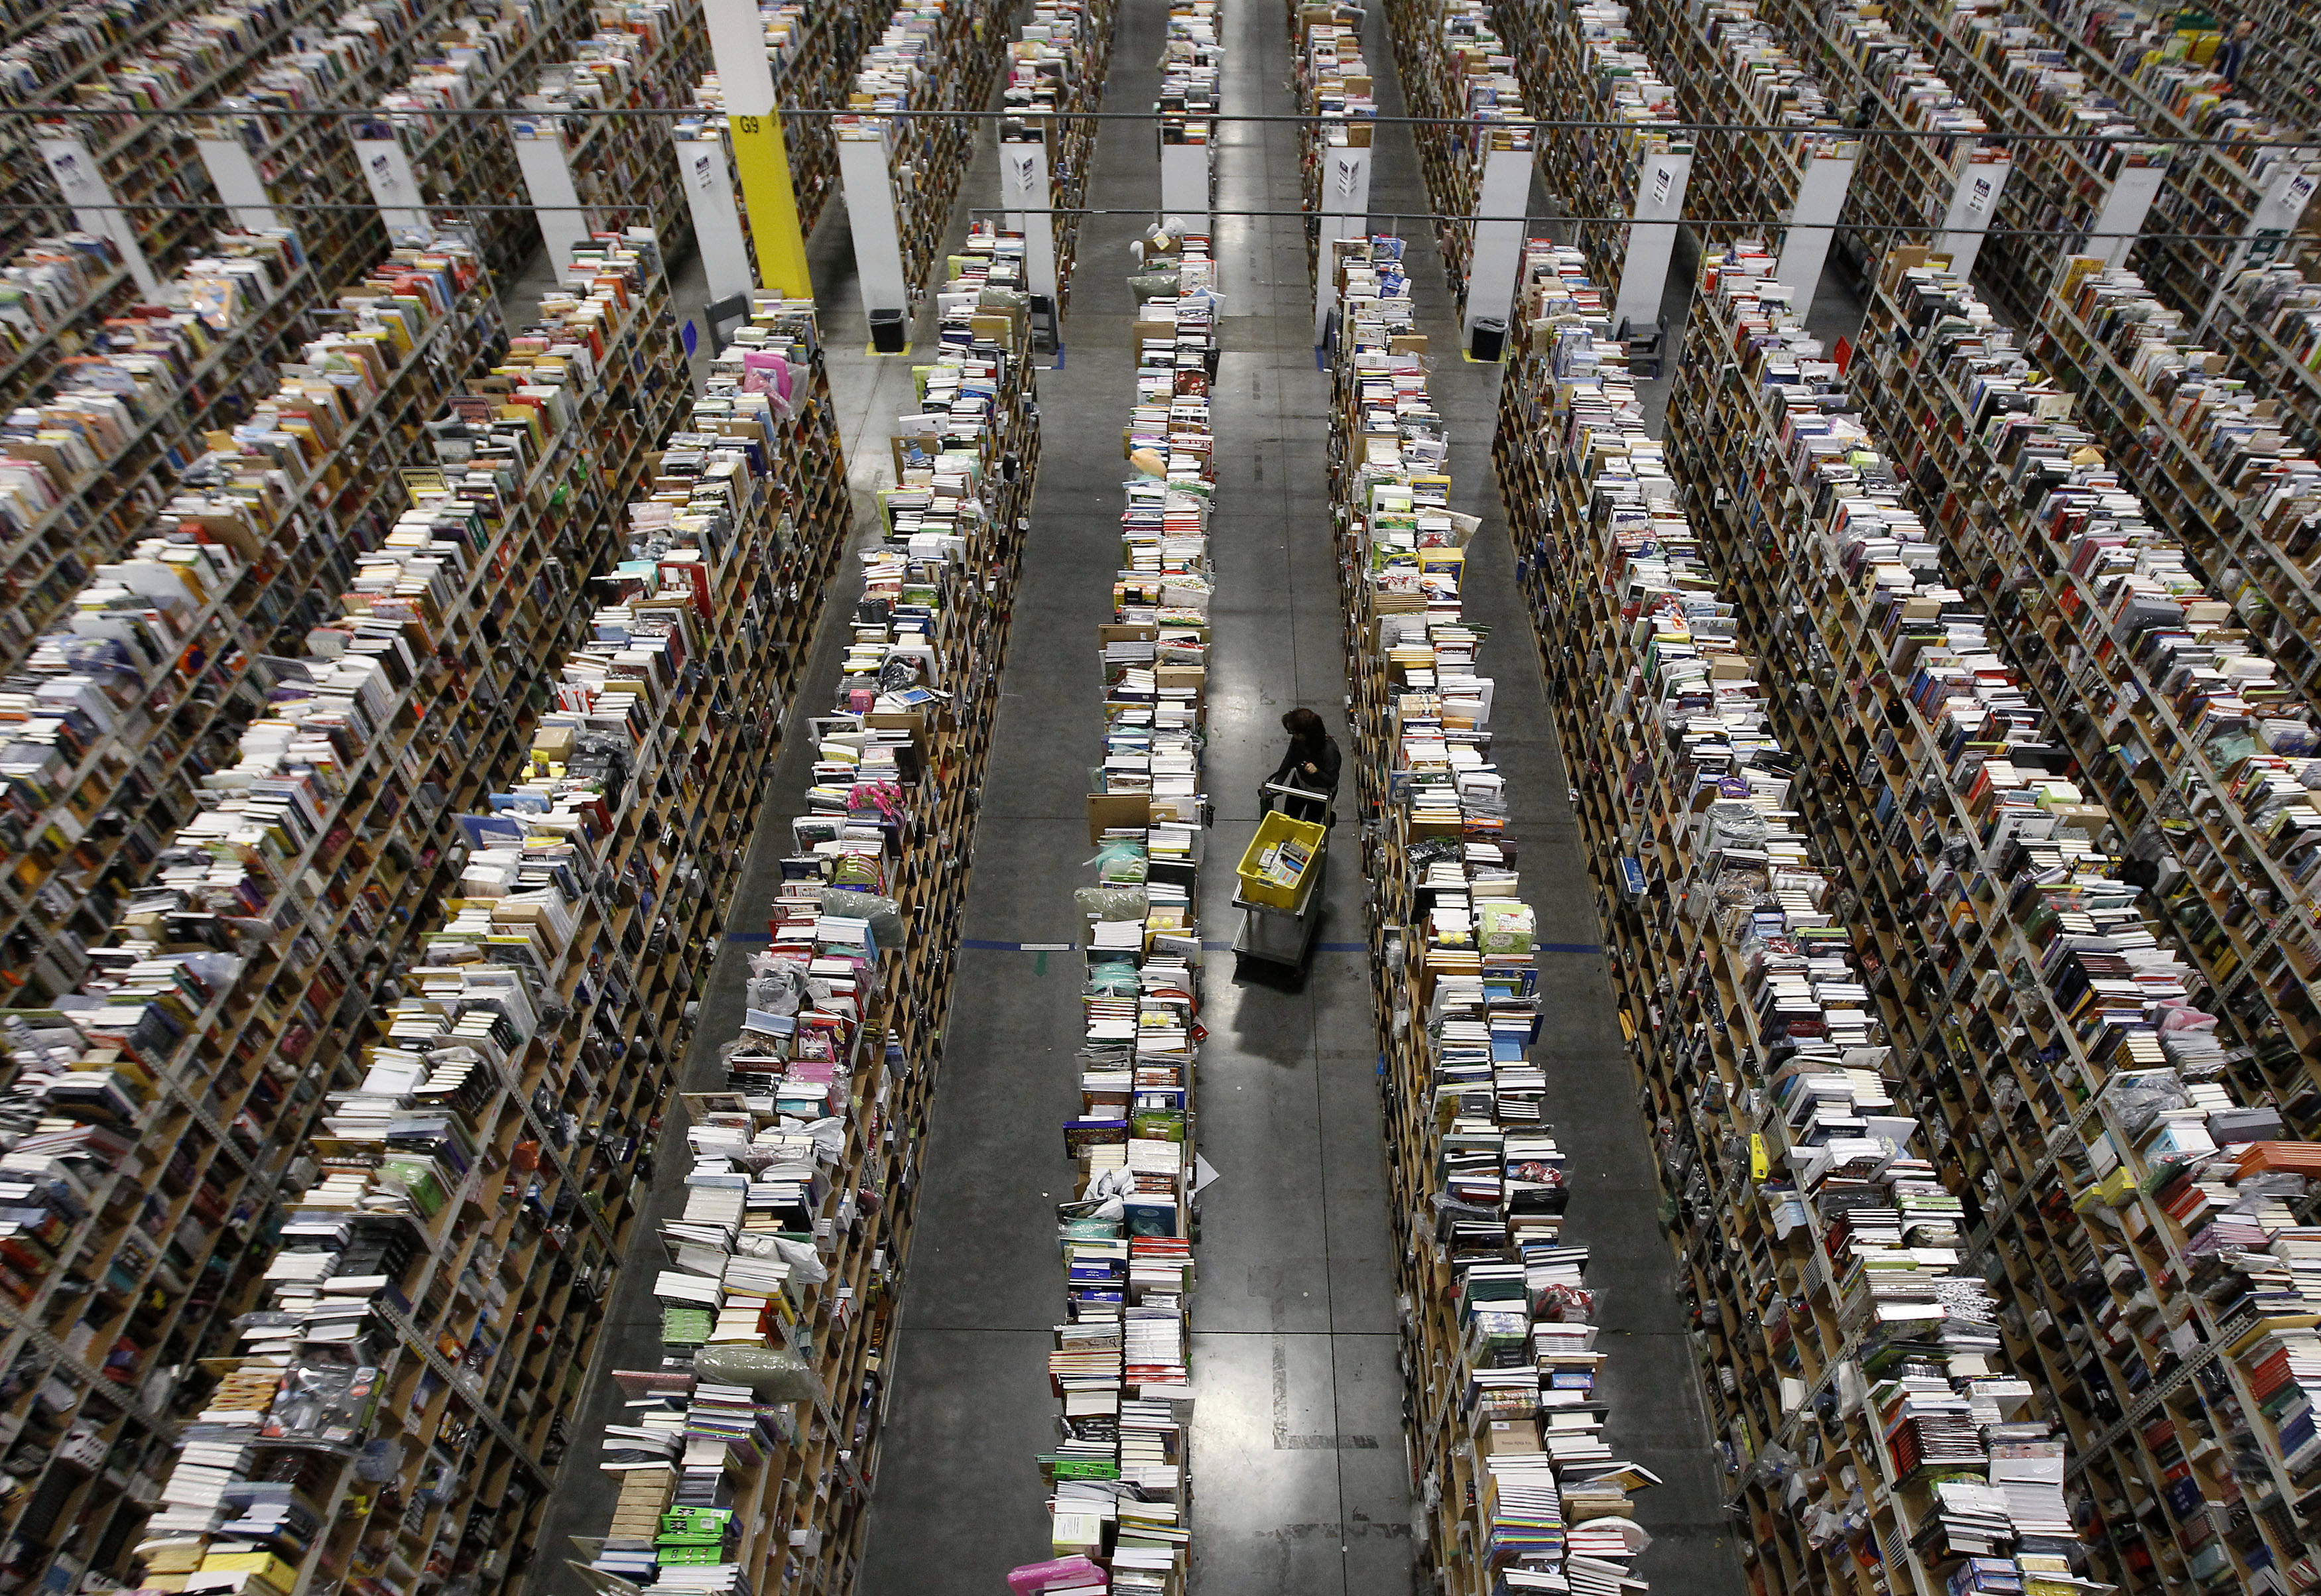 Gabriel Thompson: Online Shopping Thrives on the Backs of Warehouse Temp Workers